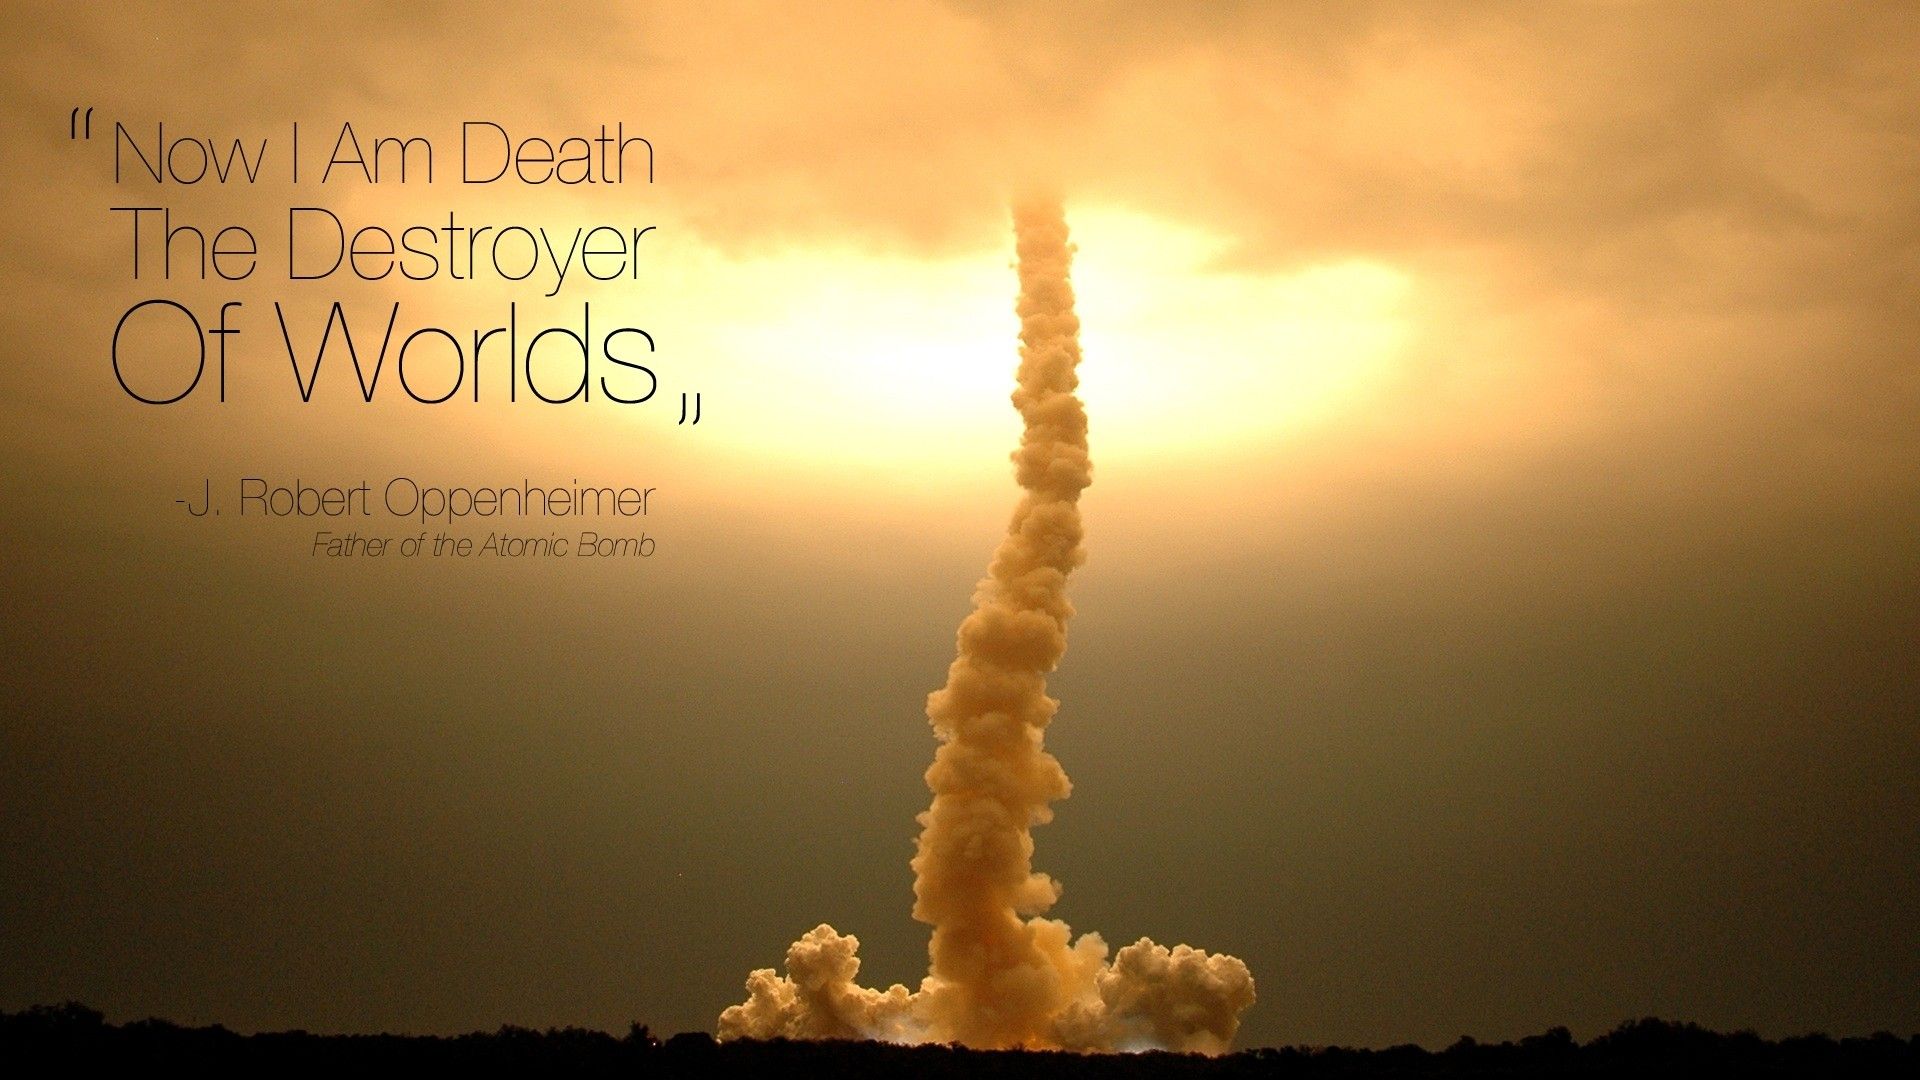 quotes, wrong, stupidity, Hinduism, launch, Shiva, rocket, skyscapes, atomic bomb wallpaper